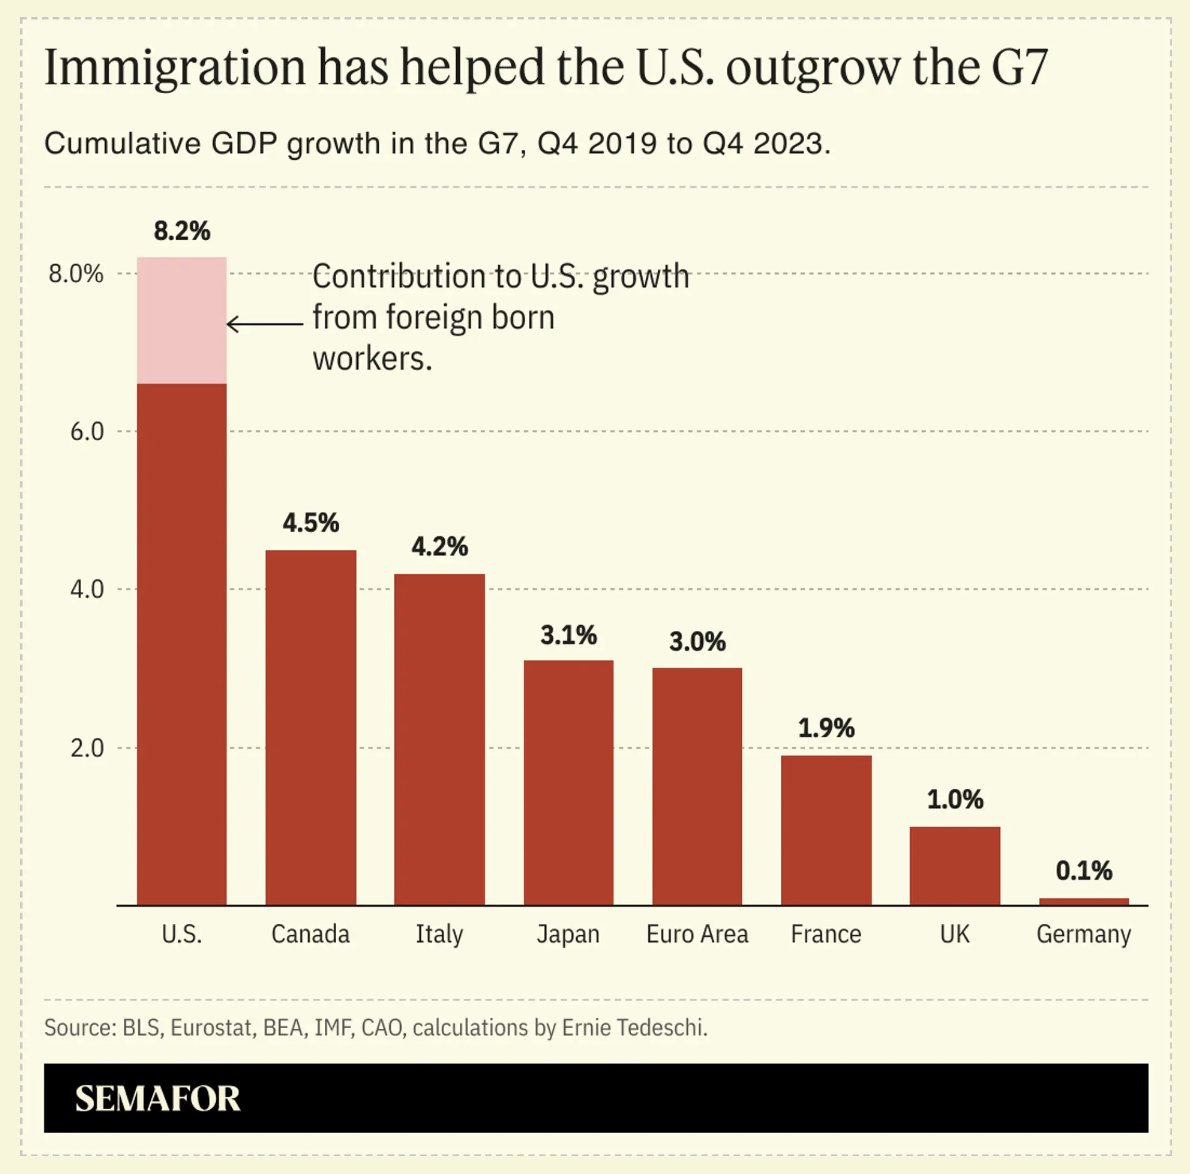 Despite all of the GOP fear mongering and lies, the proof is clear: Immigrants are good for our communities, good for our country, and VERY good for our economy.